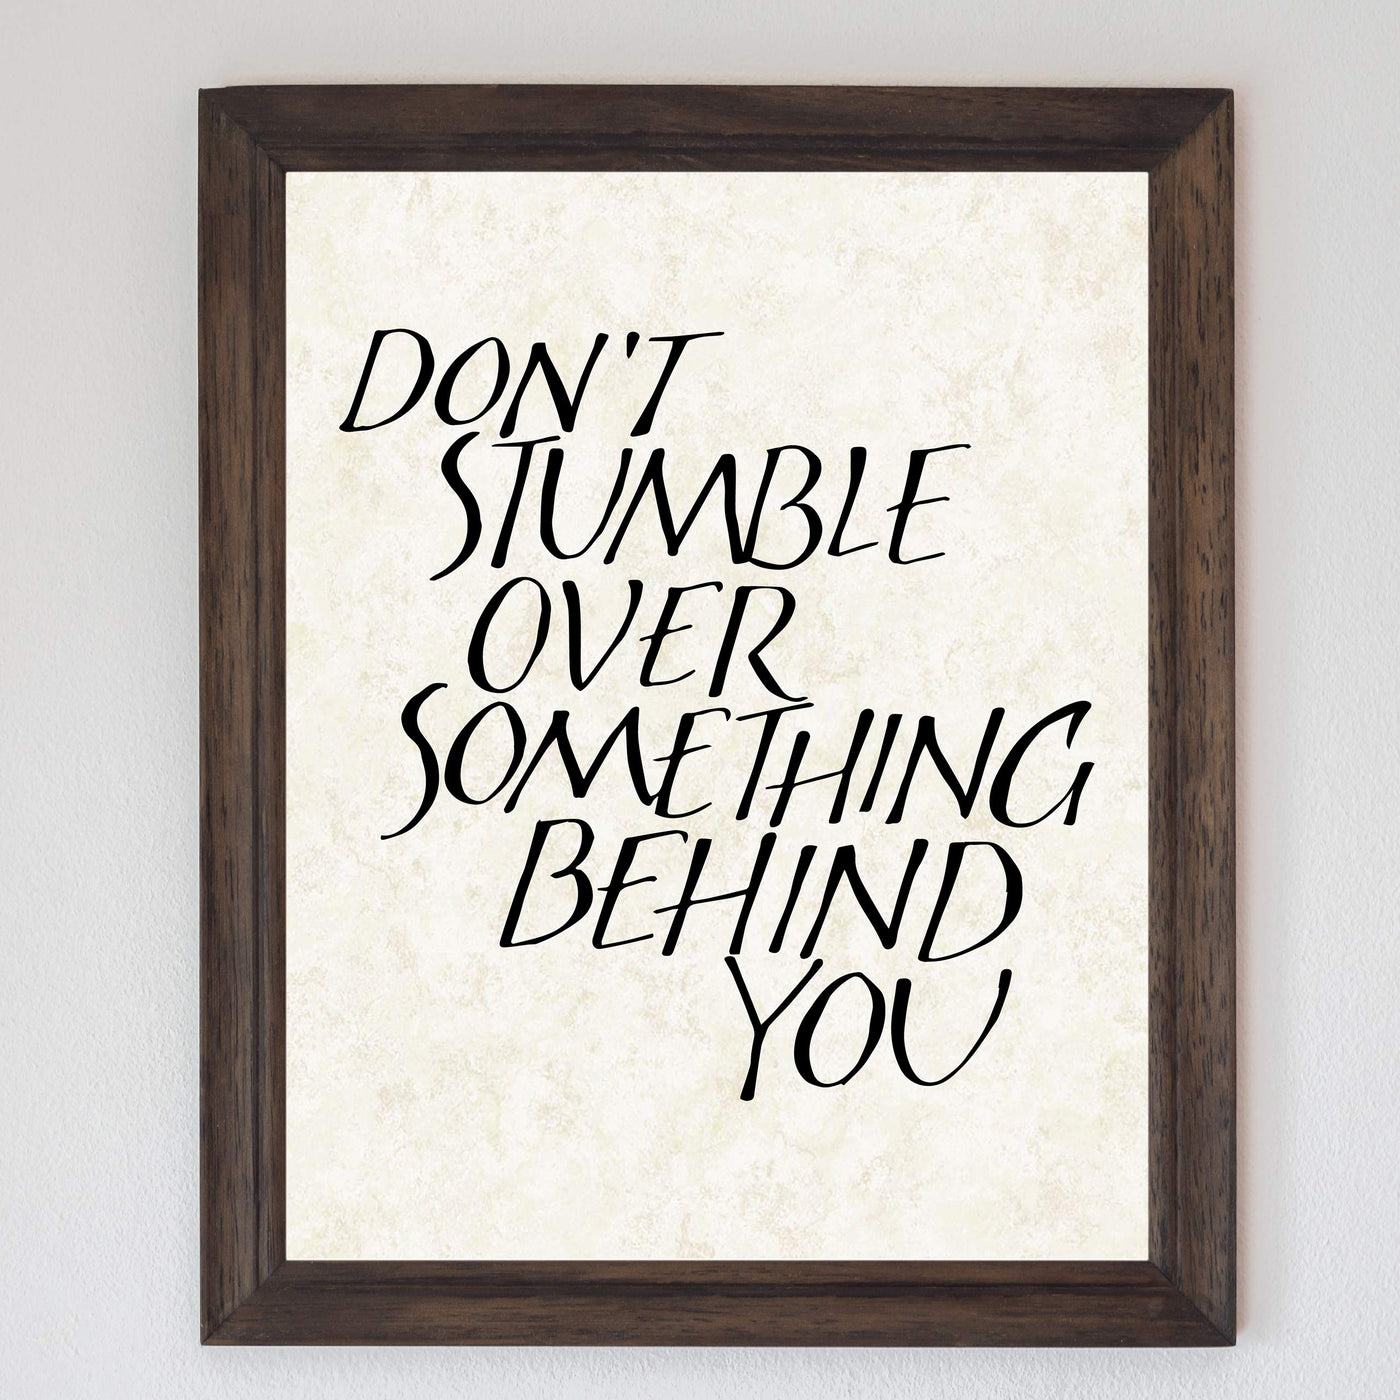 Don't Stumble Over Something Behind You Inspirational Quotes Wall Decor -8 x 10" Typographic Art Print-Ready to Frame. Motivational Home-Office-School-Dorm Decor. Great Gift for Inspiration!